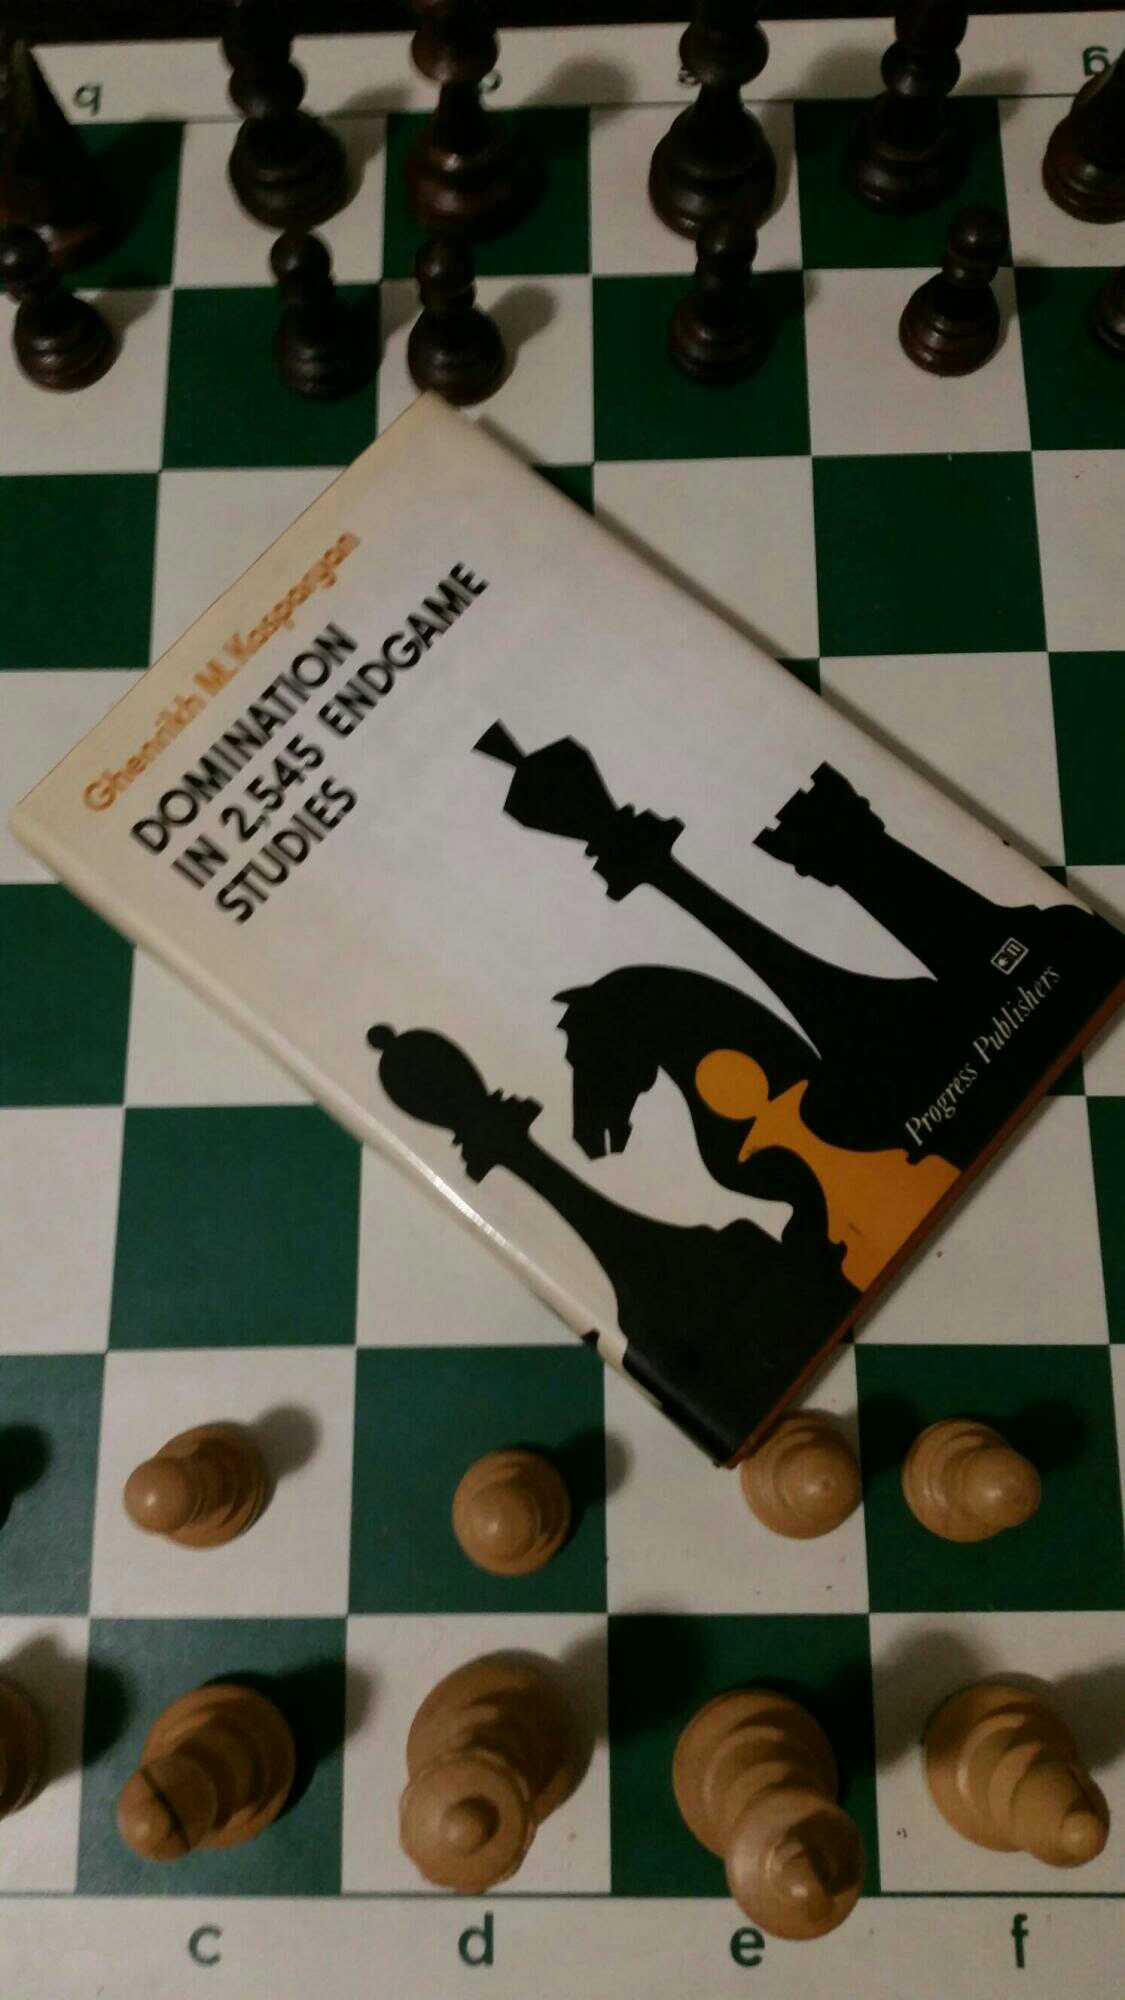 Great Games of Chess Legends - VOL. 2